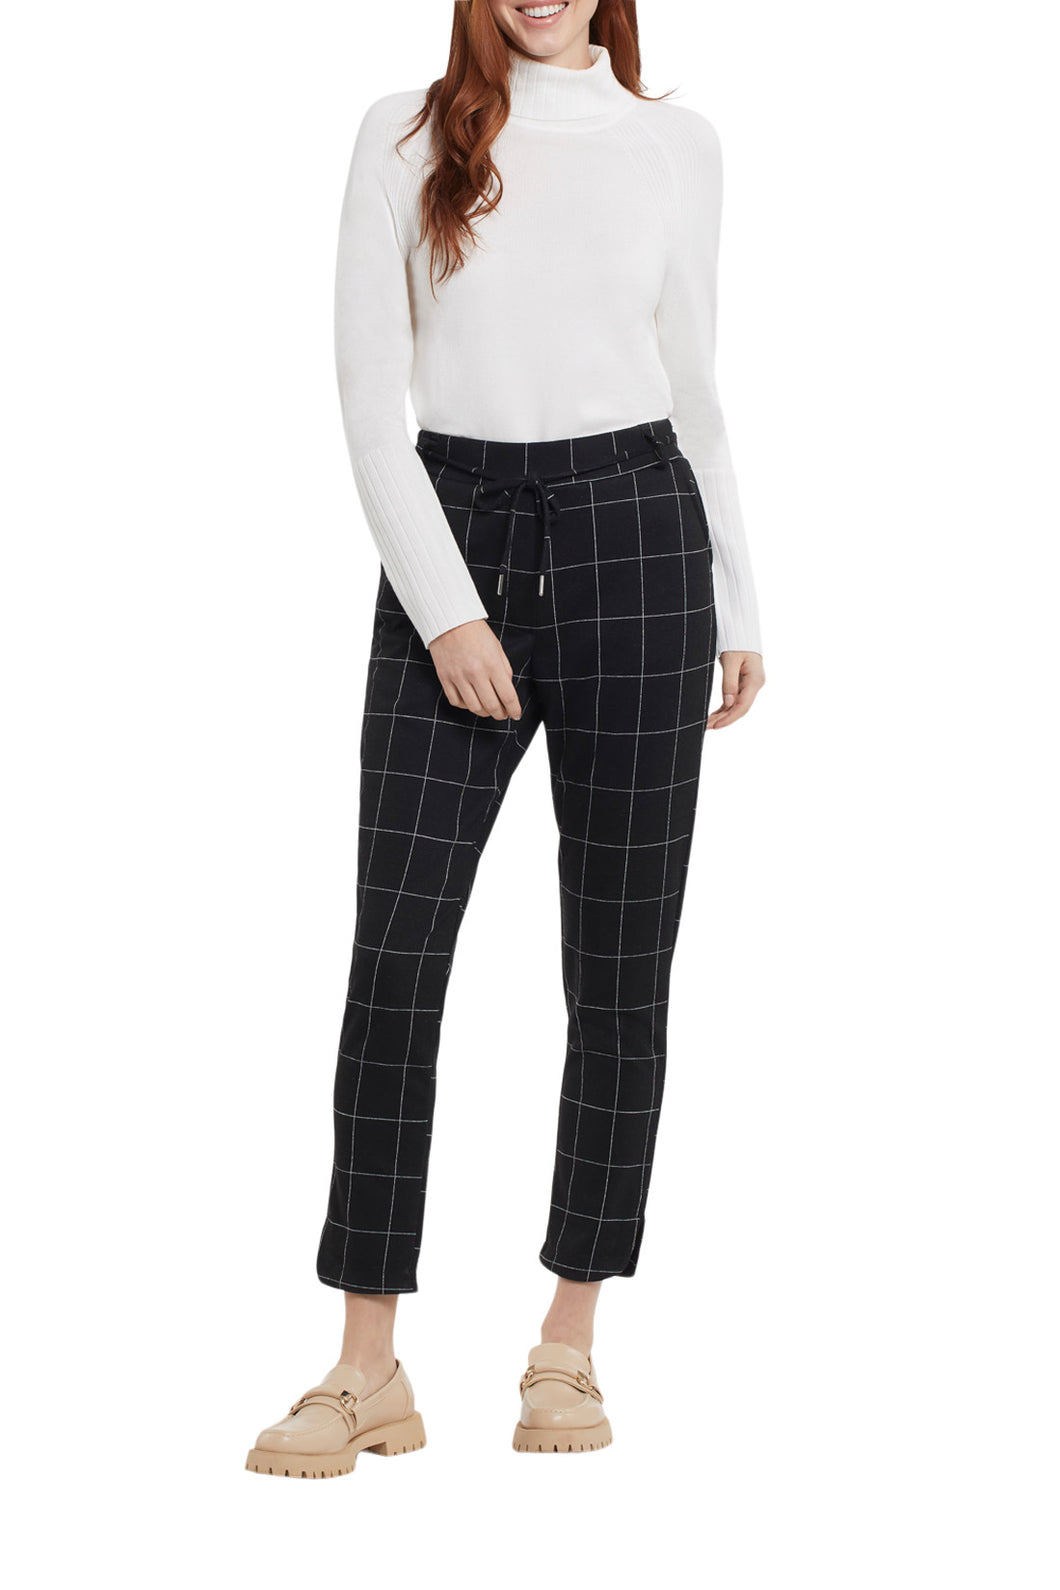  pant that is extra comfortable and has the perfect classic look, is a definite yes! You'll want to wear this pull-on pant over and over again as it offers just the right look for so many different occasions, including holiday get togethers! Color- Black and white. Black with thin white plaid stripe. Pull-on, elastic waist pant with removable corded belt. Rounded hemline. Front functional pockets.